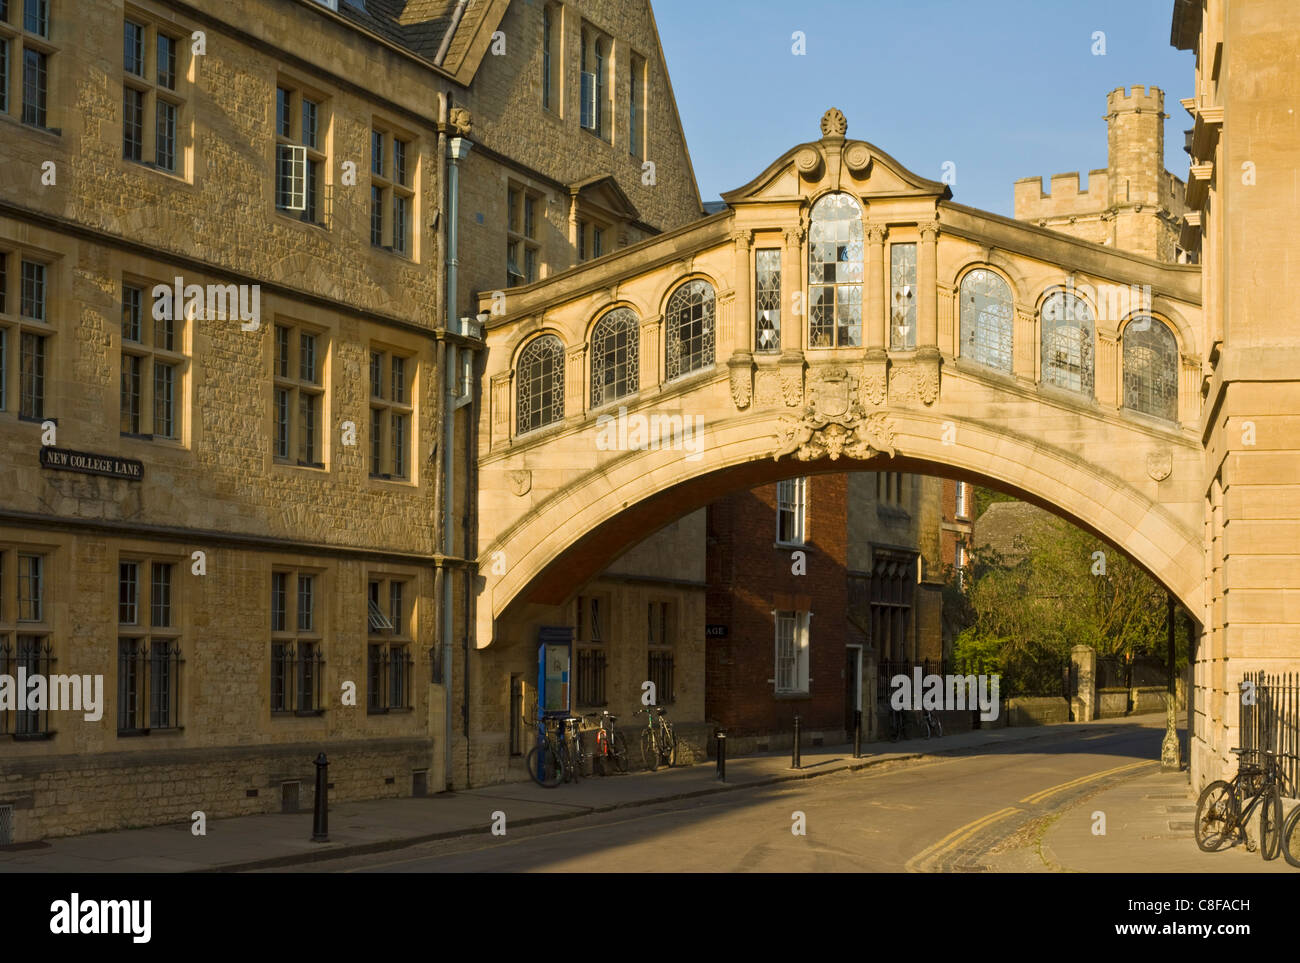 The Bridge of Sighs archway linking two buildings of Hertford College, New College Lane, Oxford, Oxfordshire, England,UK Stock Photo